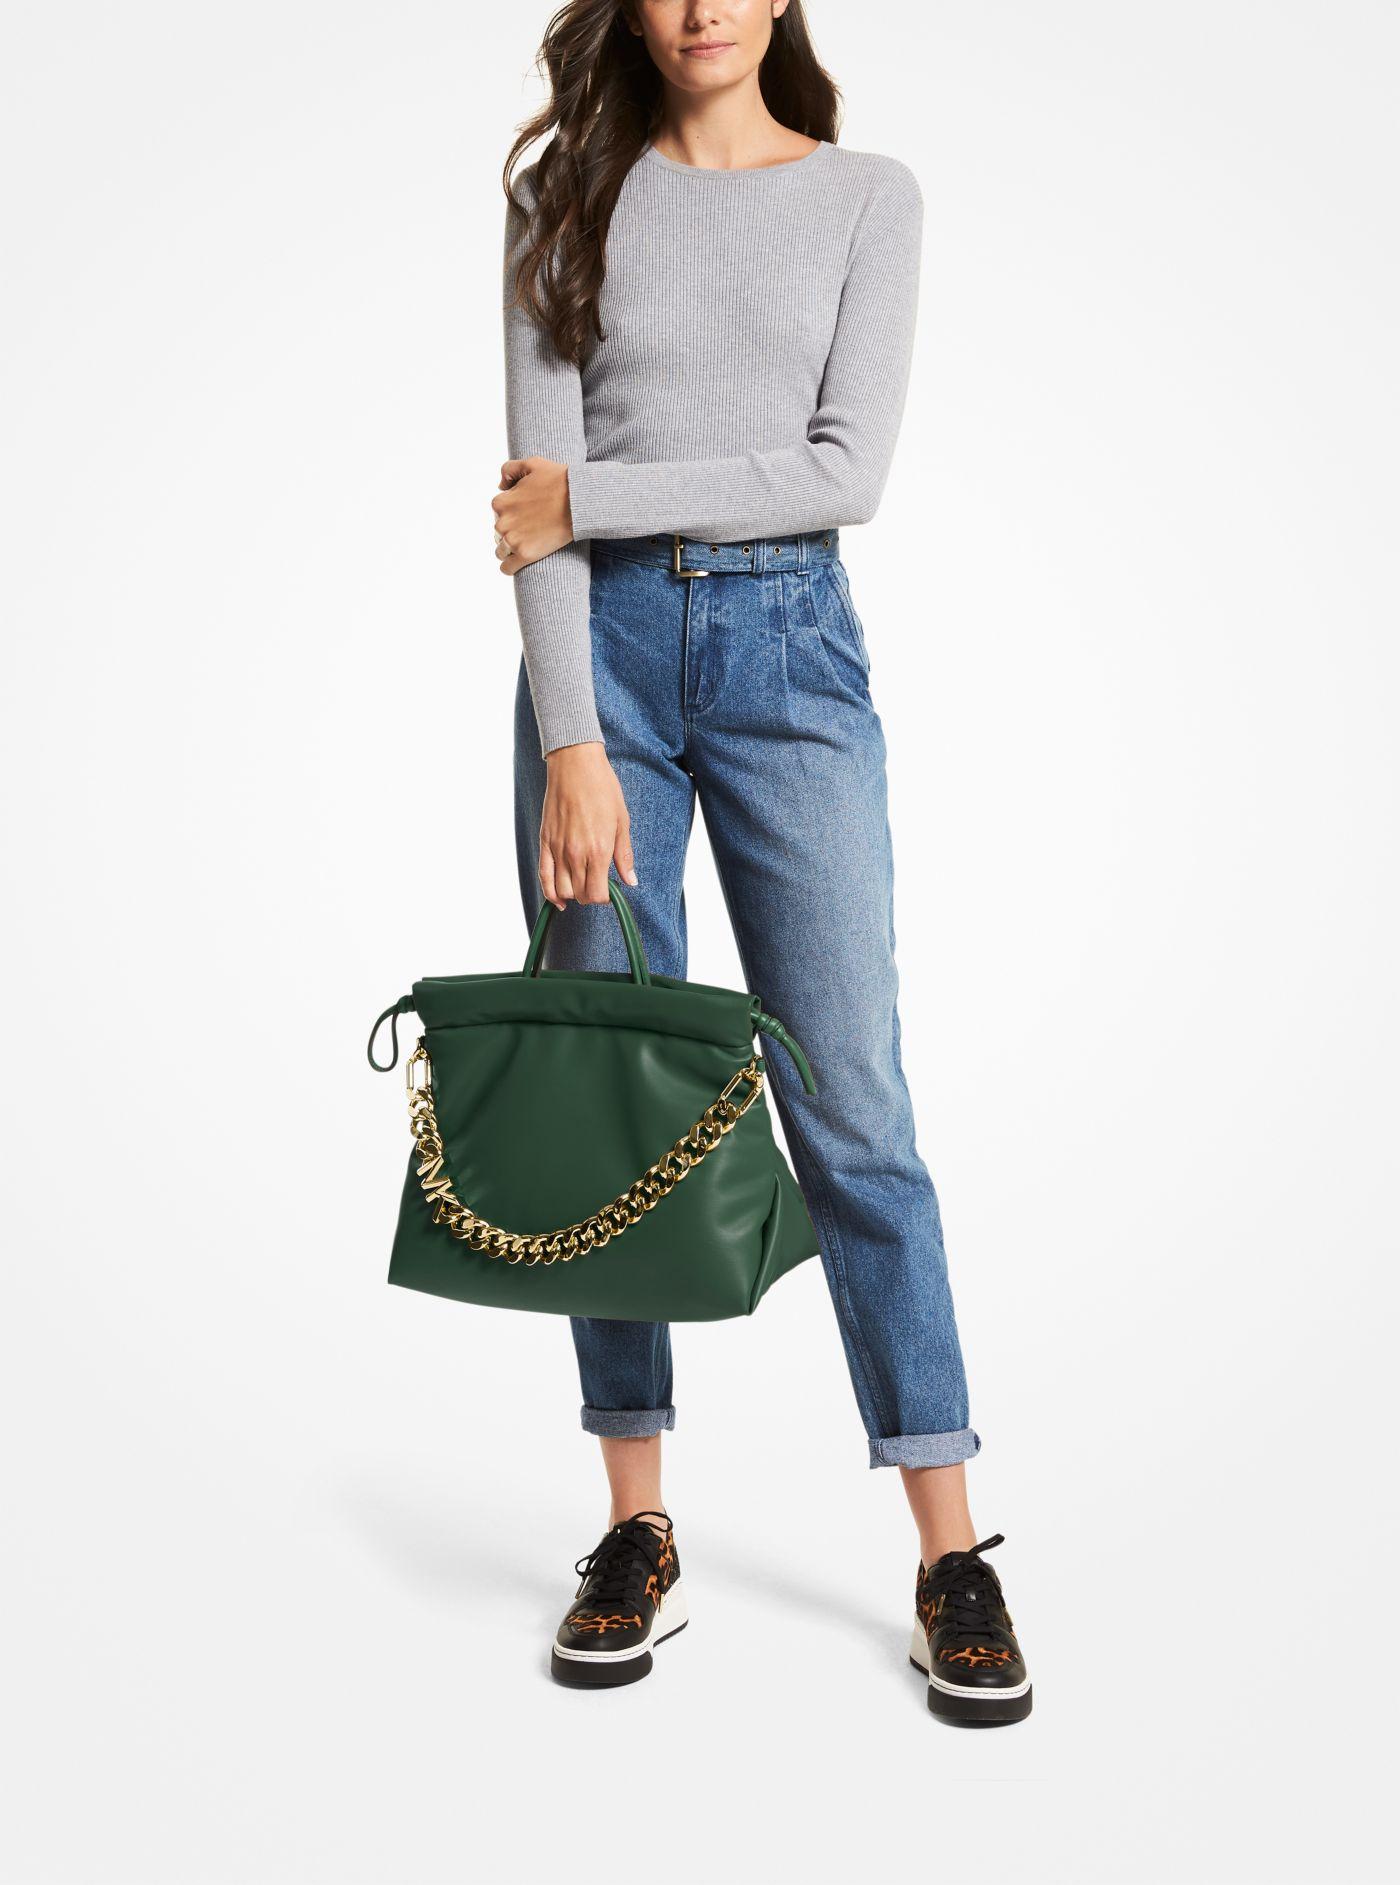 Michael Kors Lina Medium Logo Faux Leather Tote Bag in Green | Lyst Canada